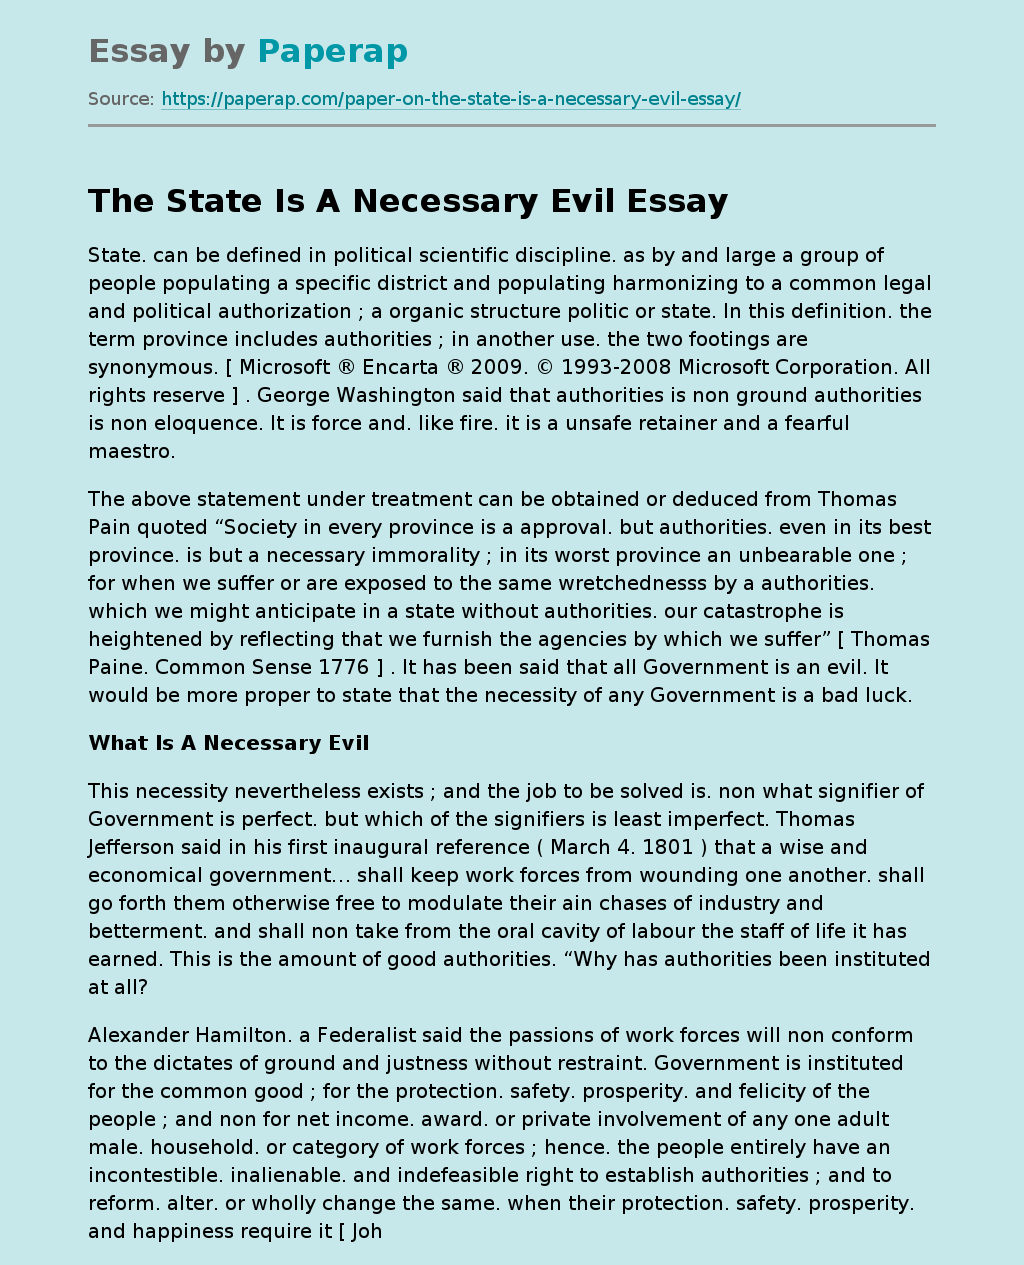 The State Is A Necessary Evil